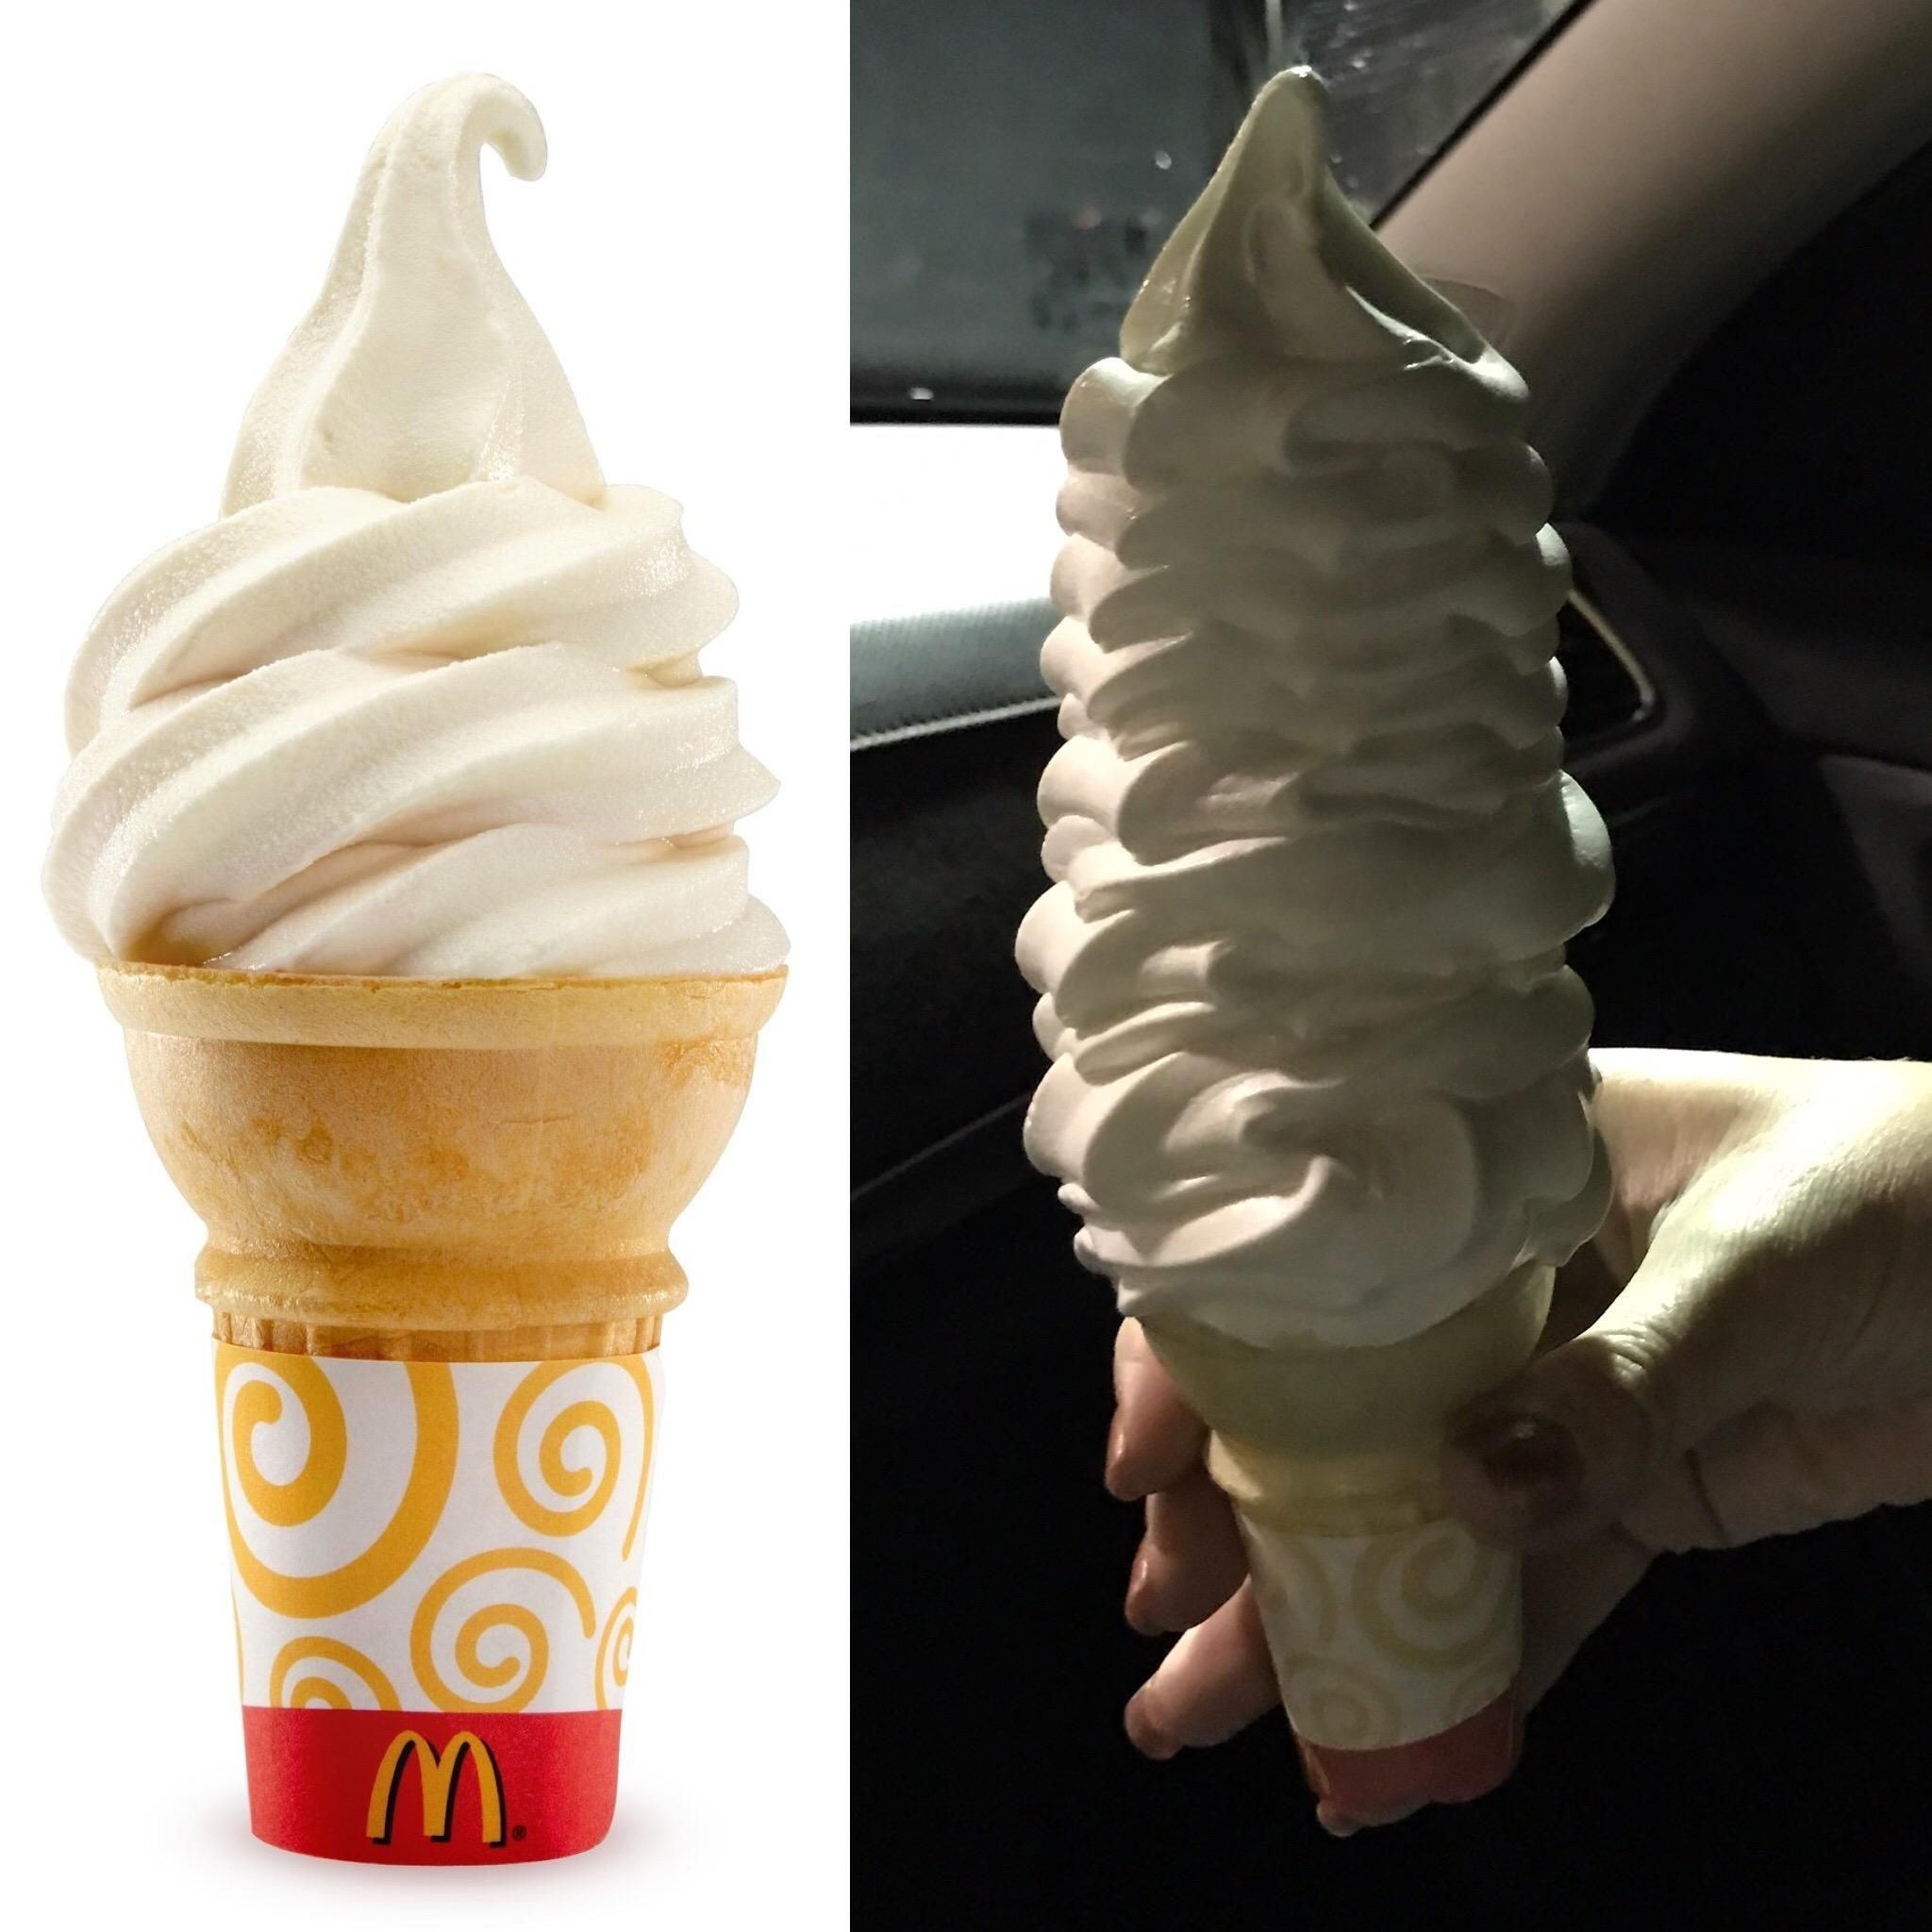 My wife's Mcdonald's cone in the drive through last night.